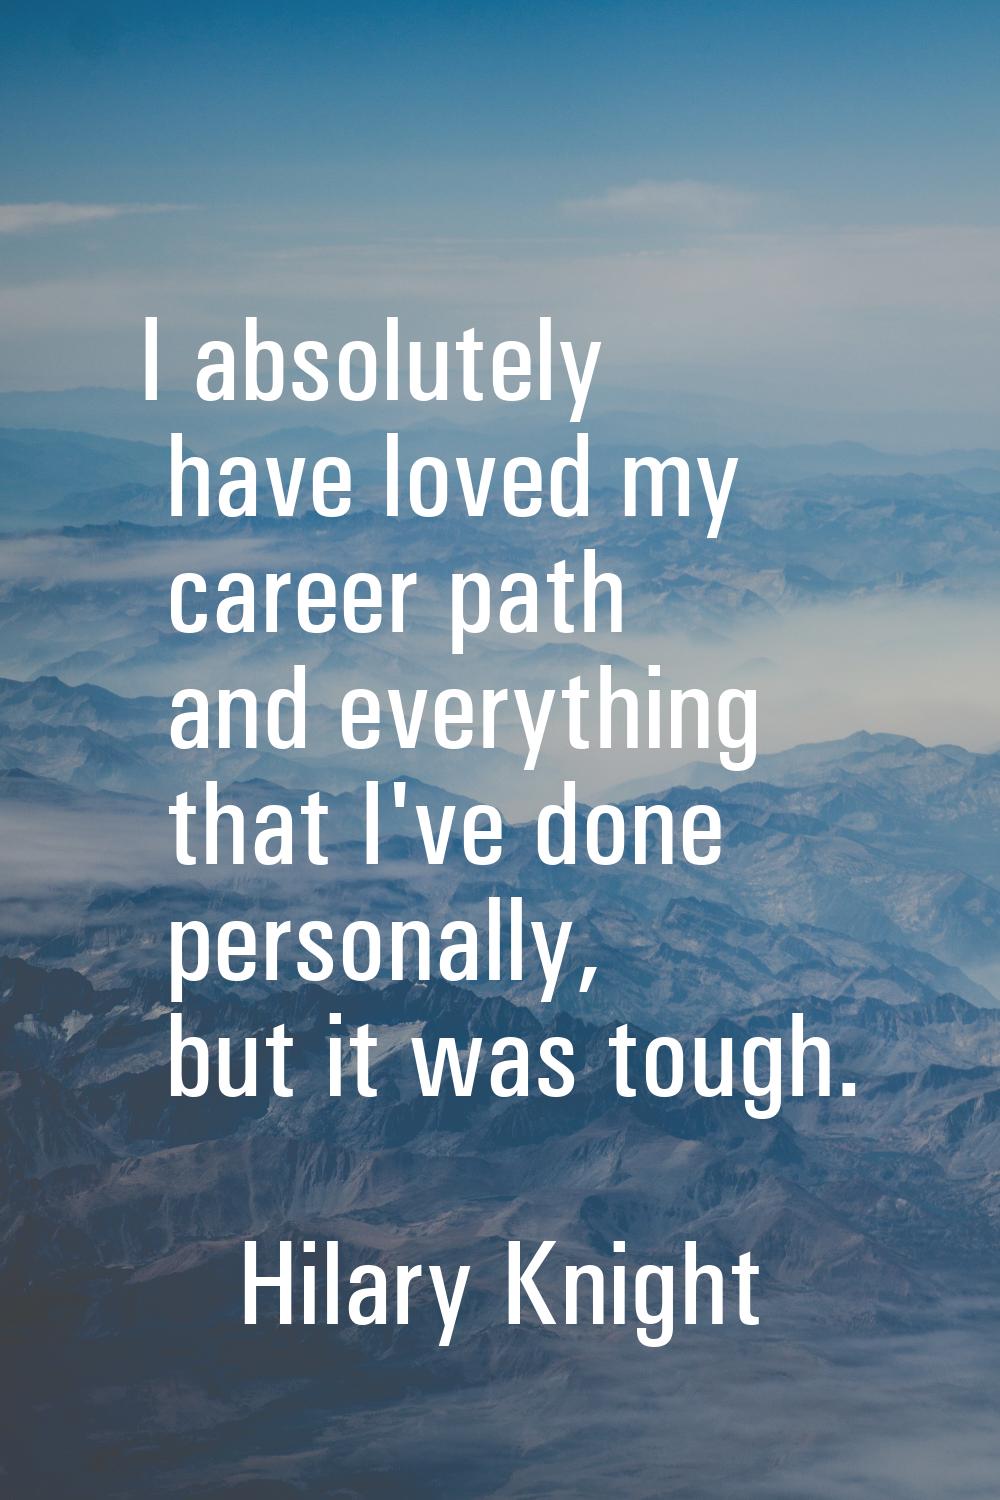 I absolutely have loved my career path and everything that I've done personally, but it was tough.